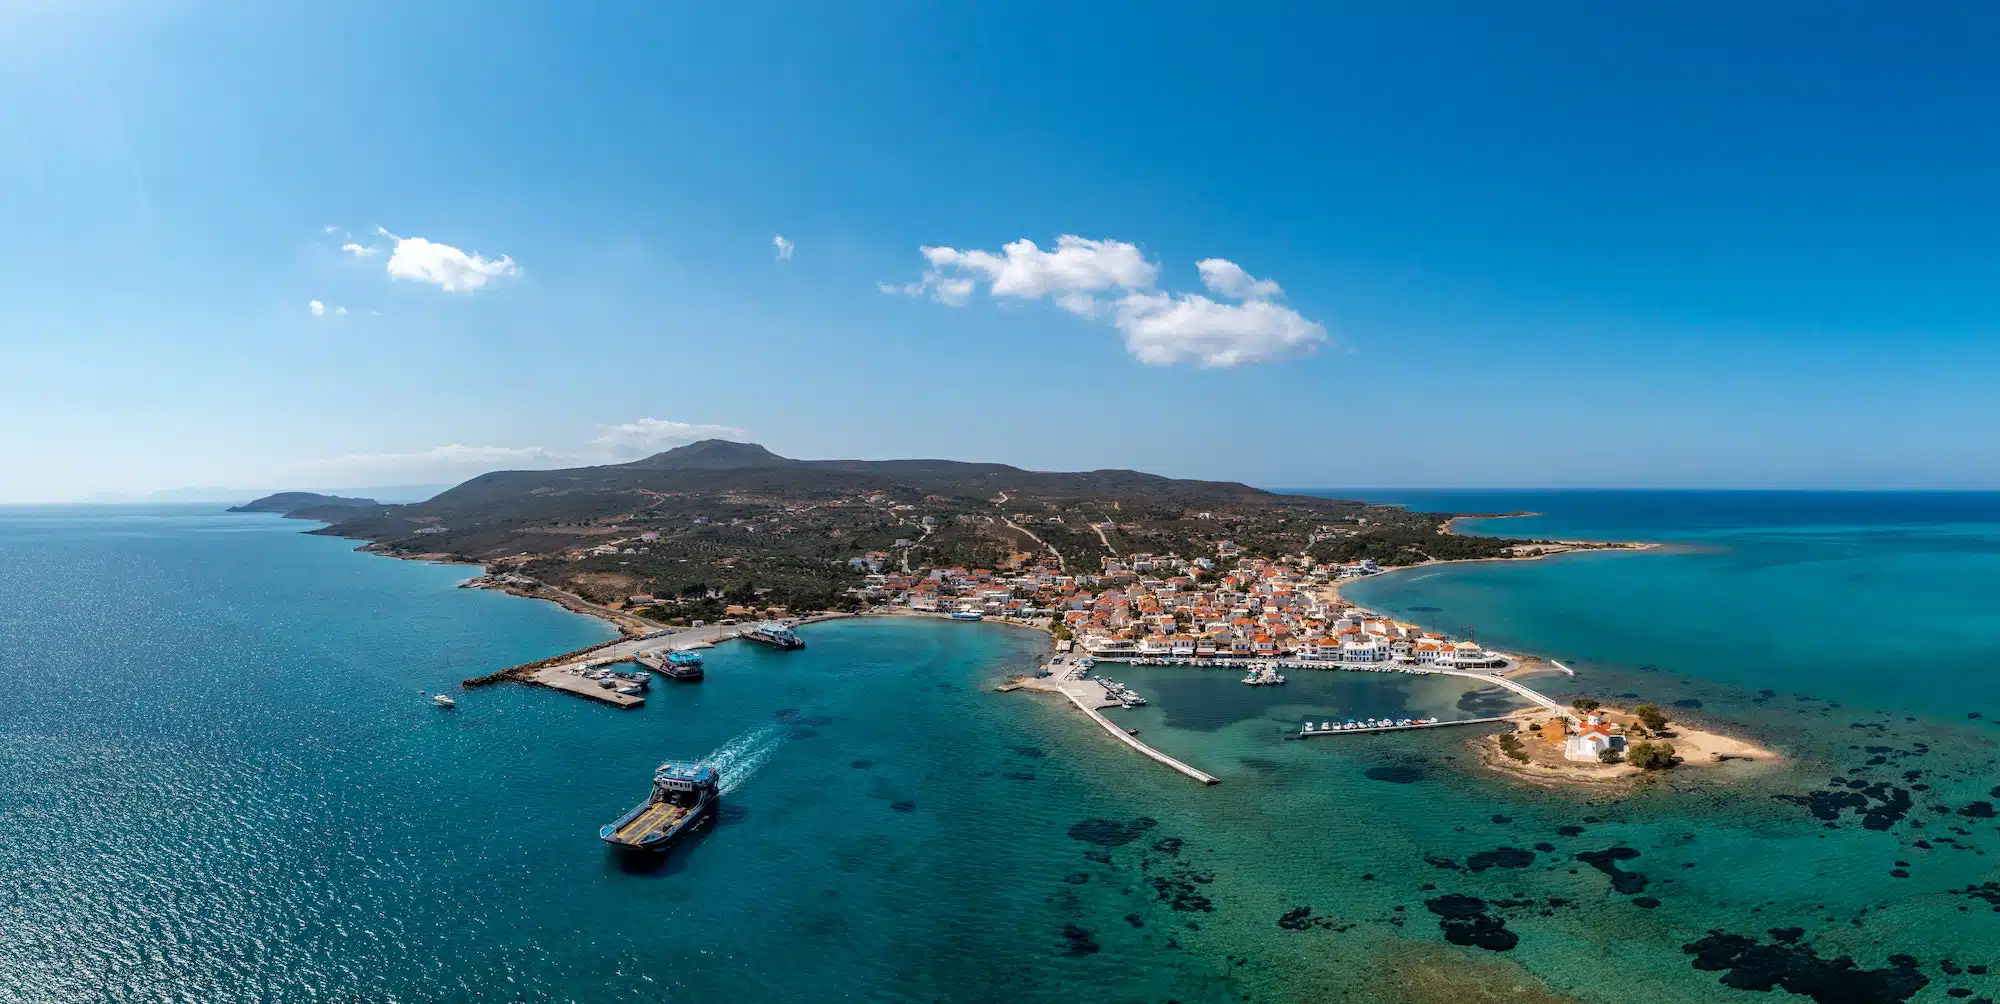 Elafonisos Peloponnese. Greece. Ferry departing from harbor to Pounta Lakonia, aerial drone view,